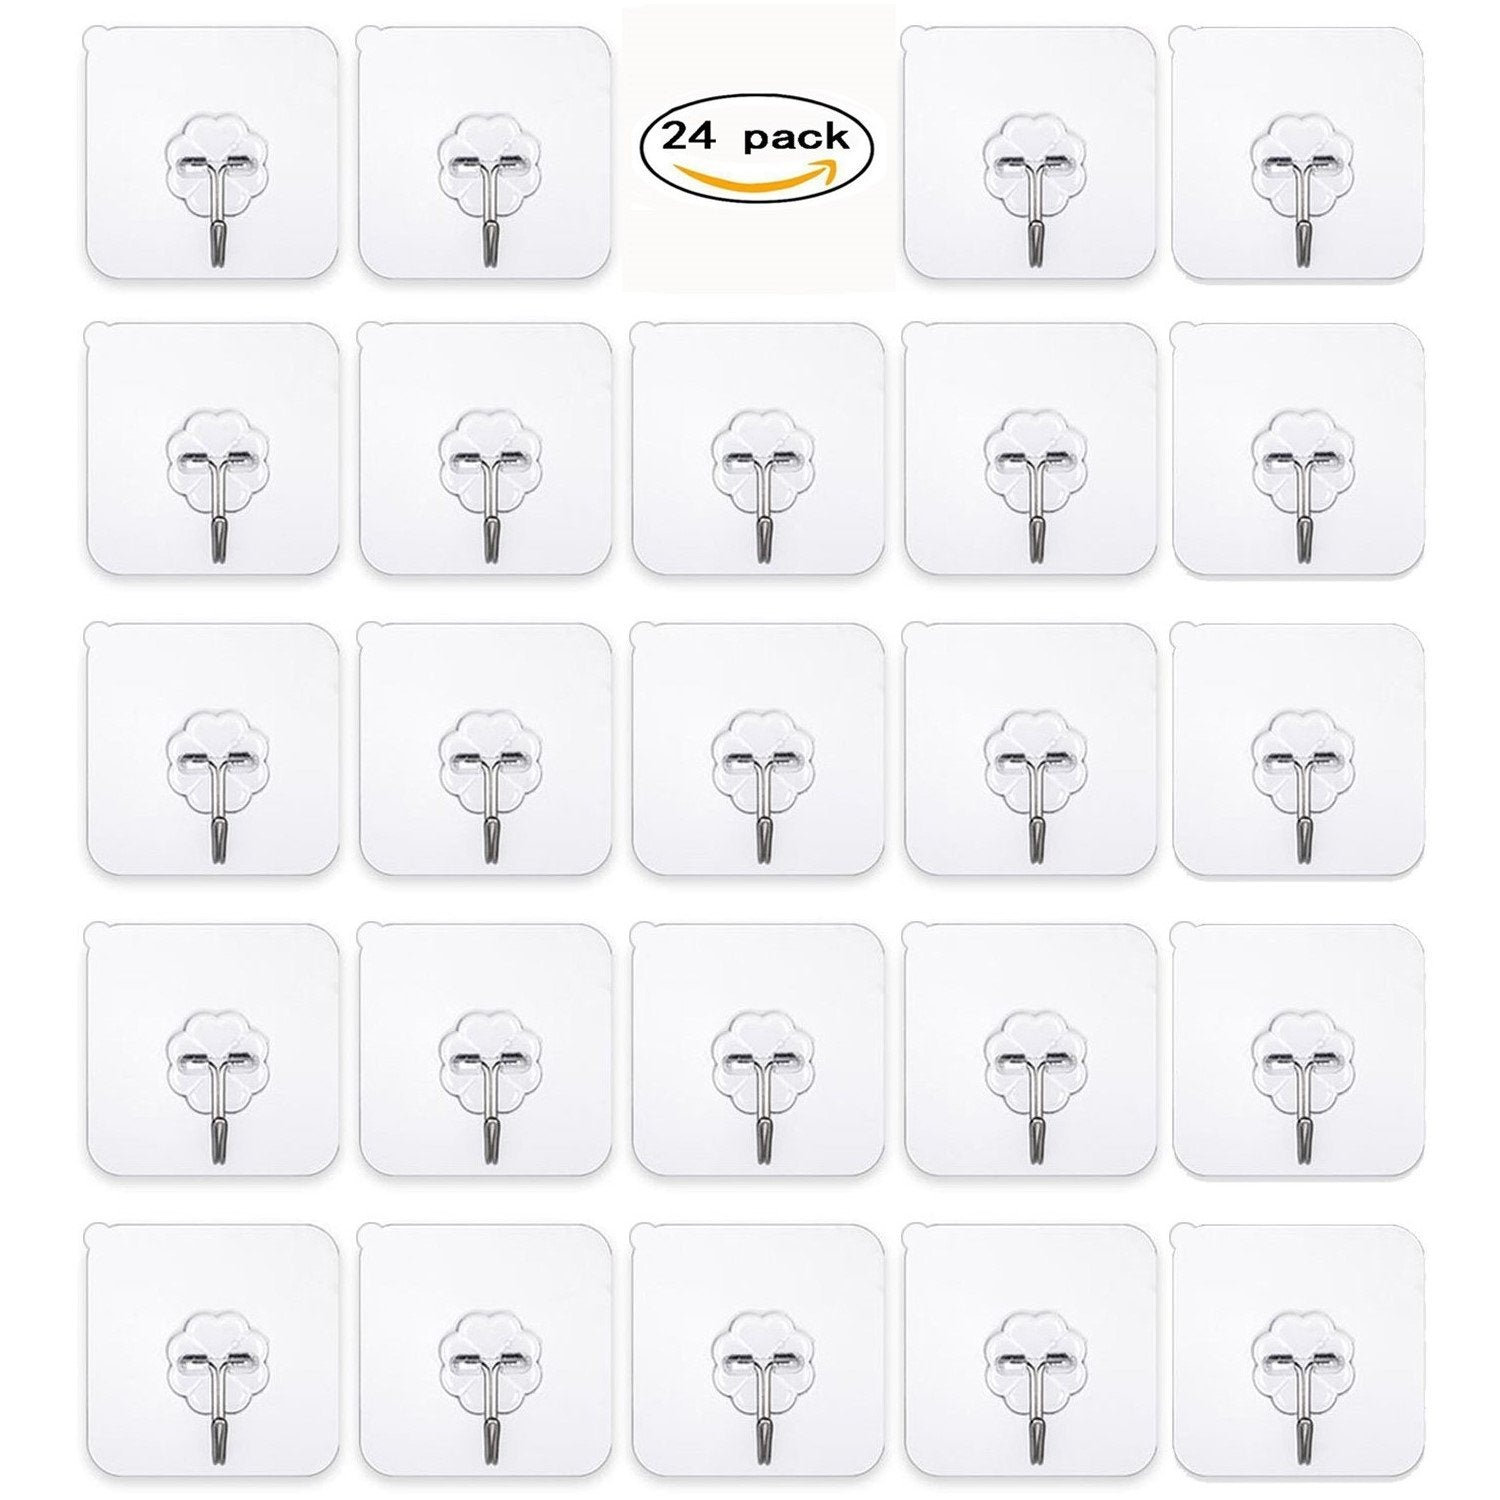 Adhesive Hooks Heavy Duty Hooks - 24 Packs Hooks Utility Hooks Heavy Duty Wall Hooks Waterproof Reusable Seamless Sticky Hook for Bathroom Kitchen Wall Door Ceiling and More